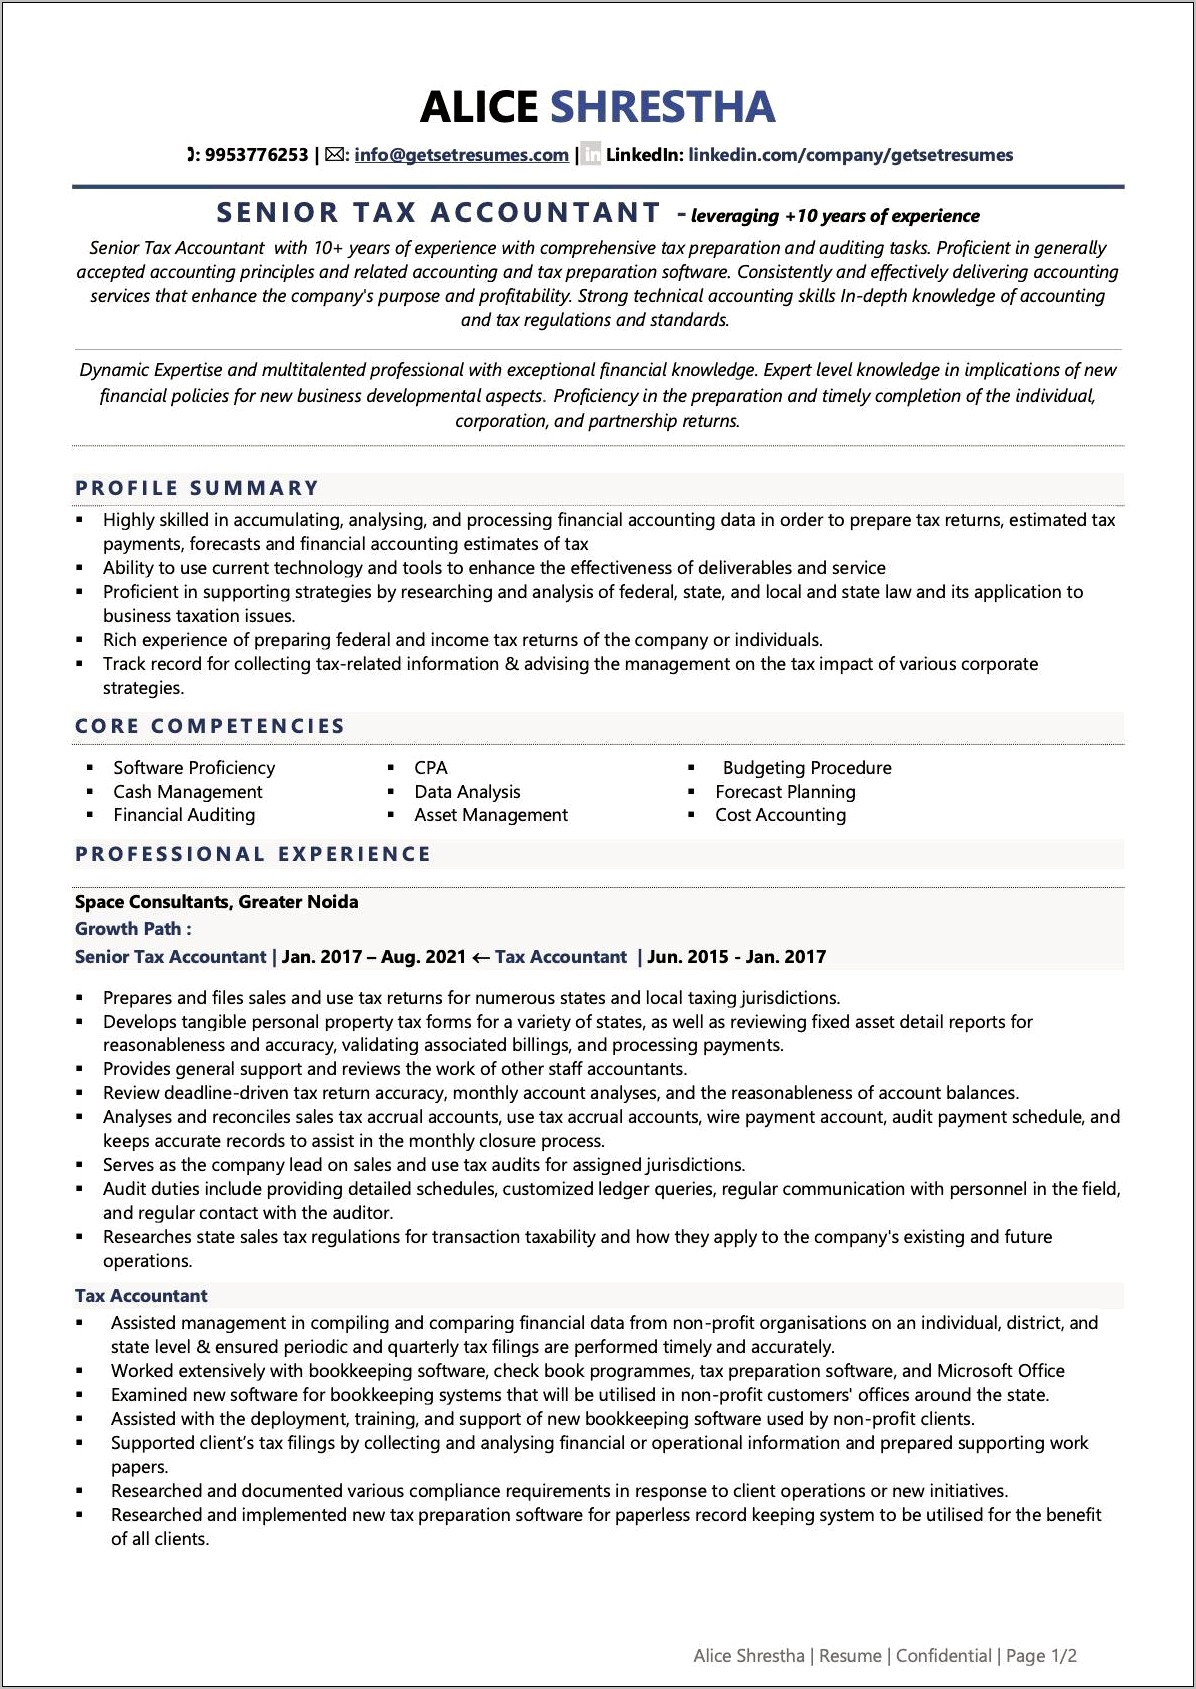 Resume Personal Skills For Accounting